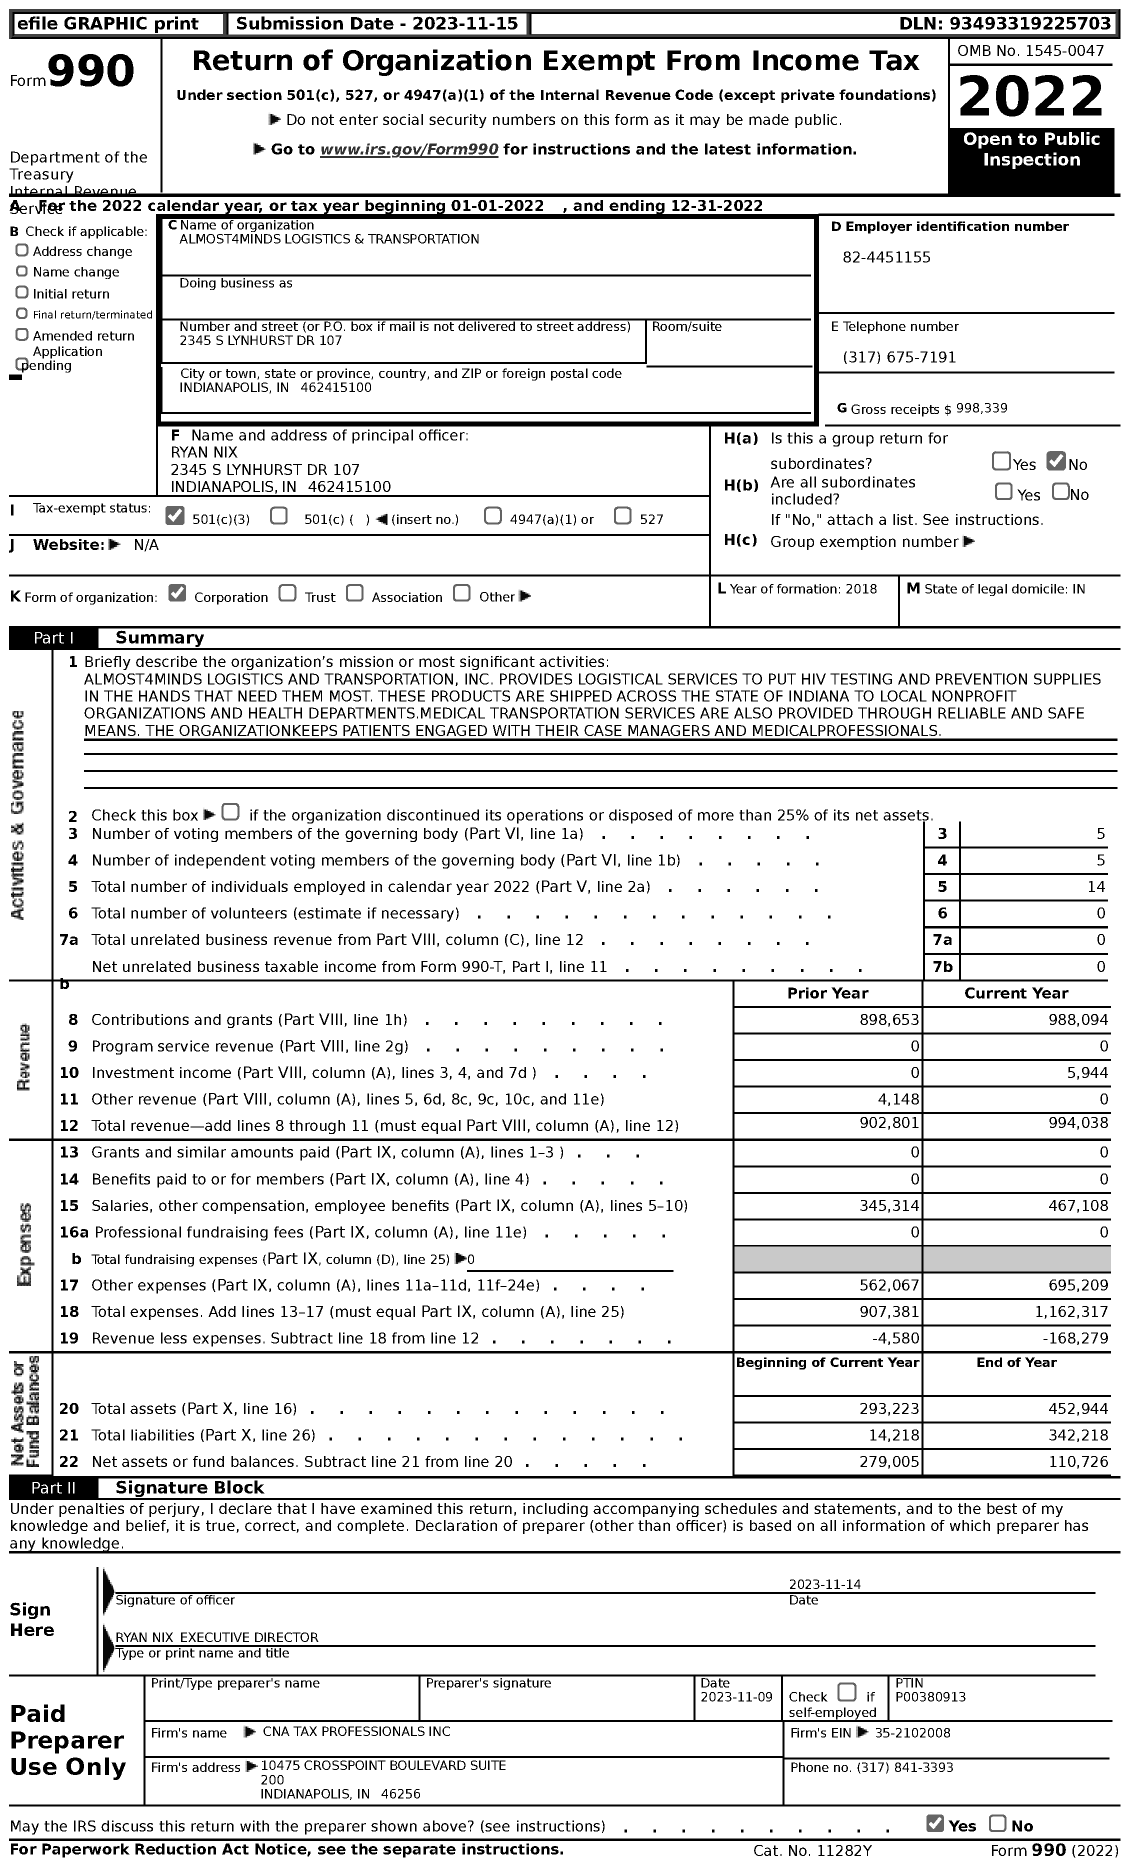 Image of first page of 2022 Form 990 for Almost4minds Logistics and Transportation